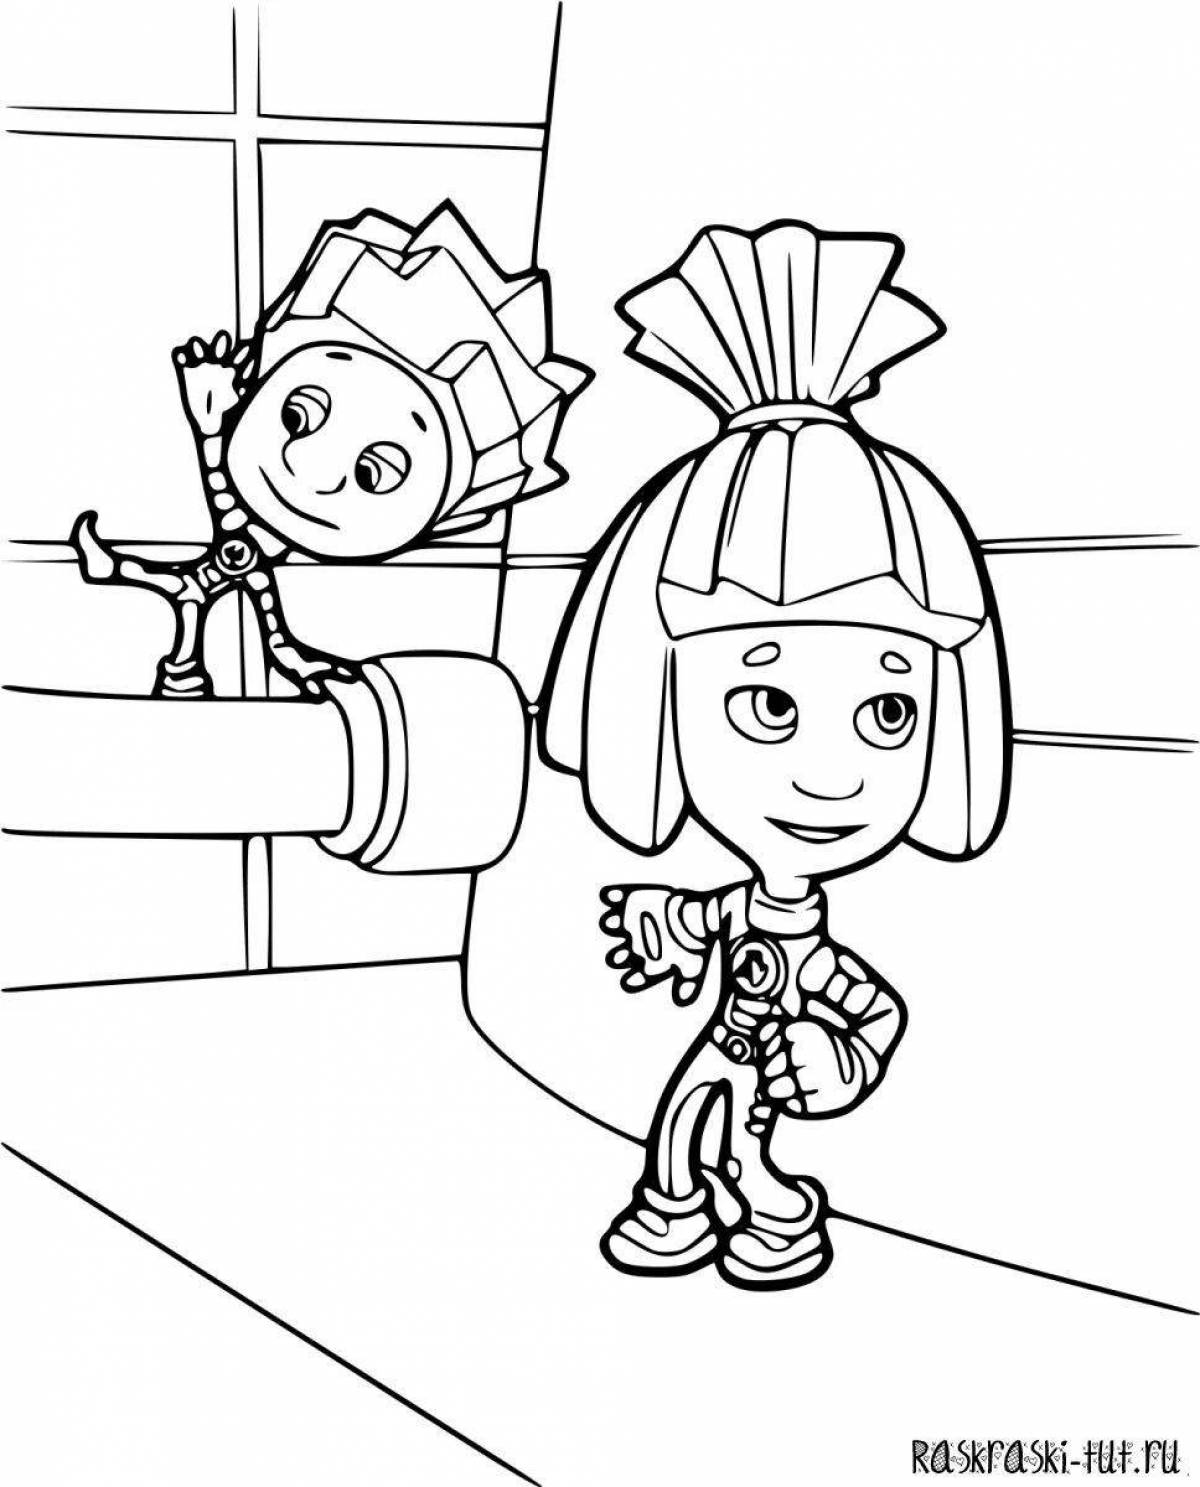 Animated fixies coloring pages for boys